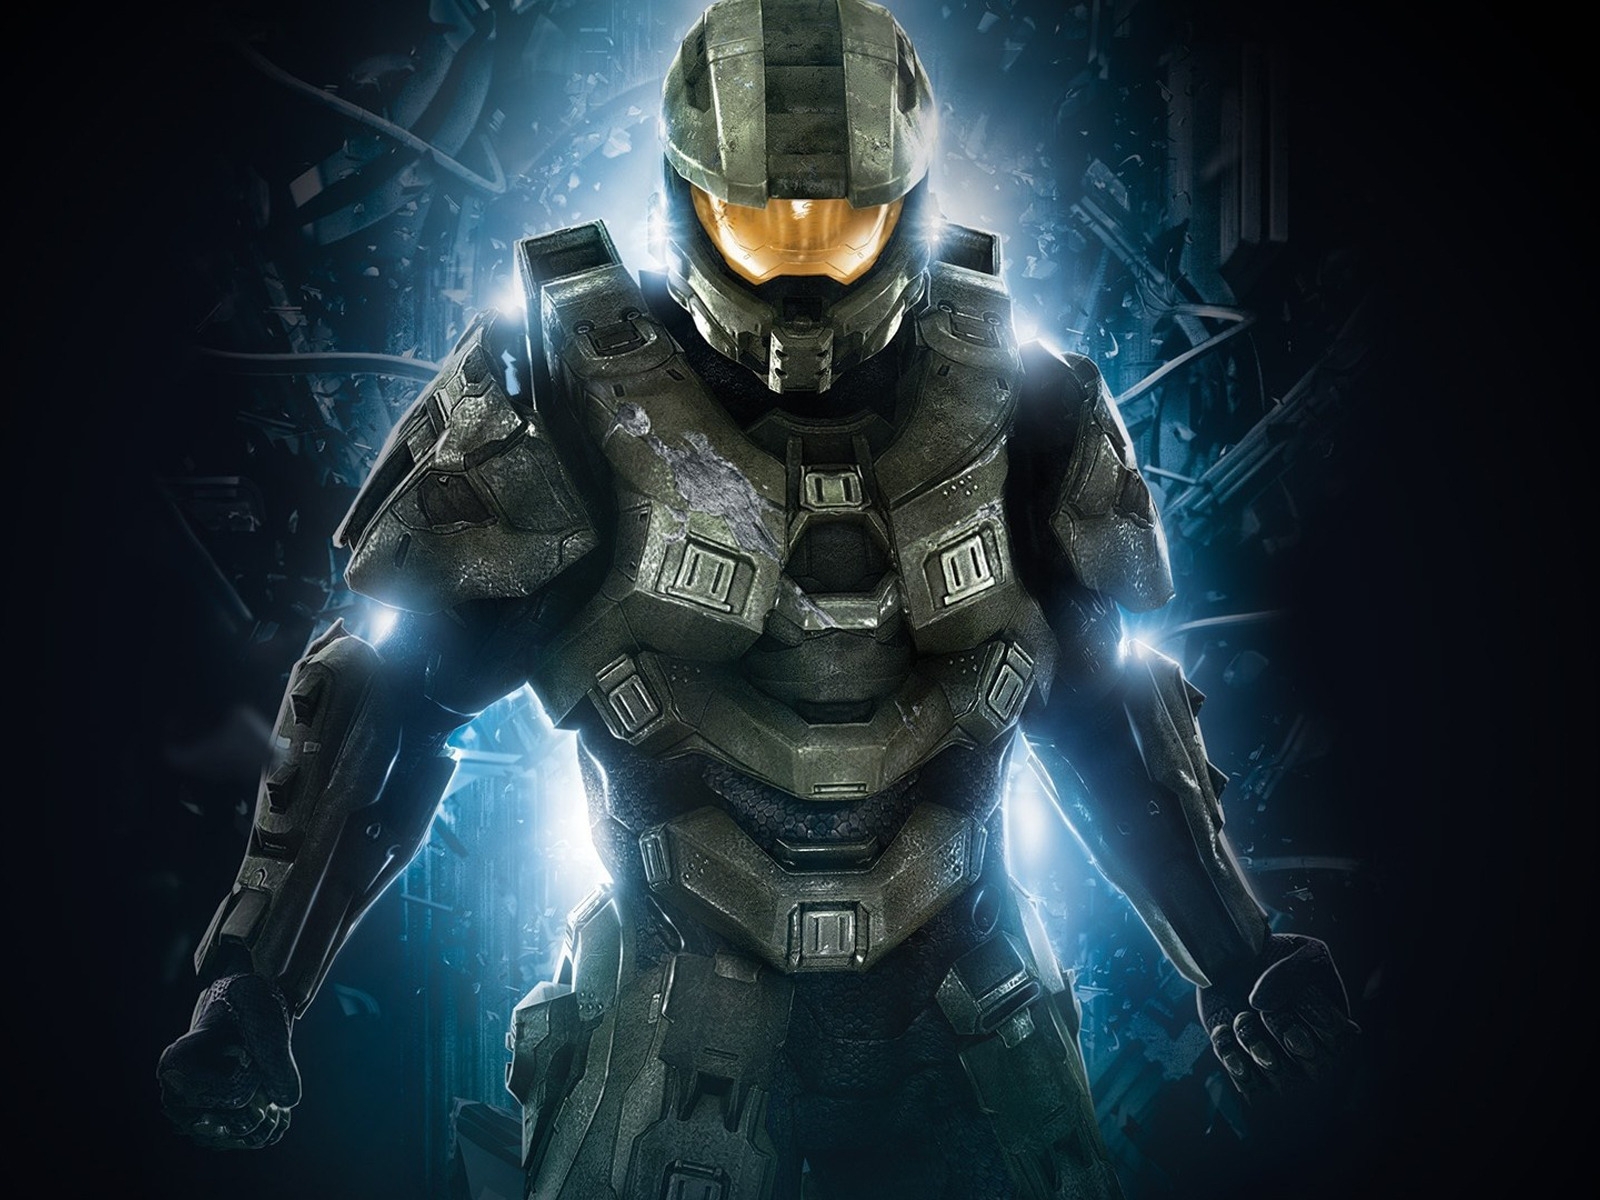 Halo Character for 1600 x 1200 resolution